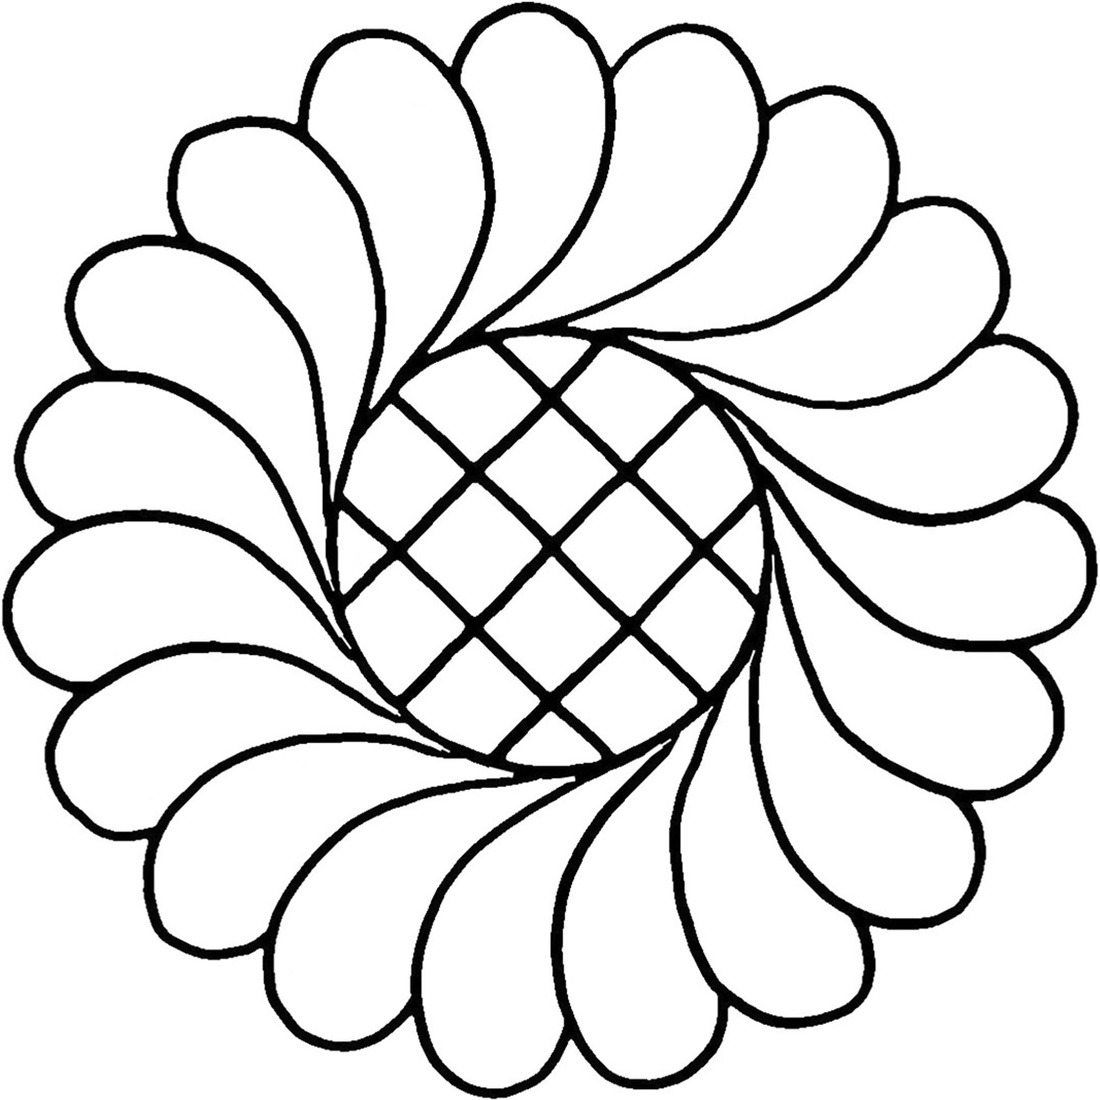 30364 Feather Wreath with Grid